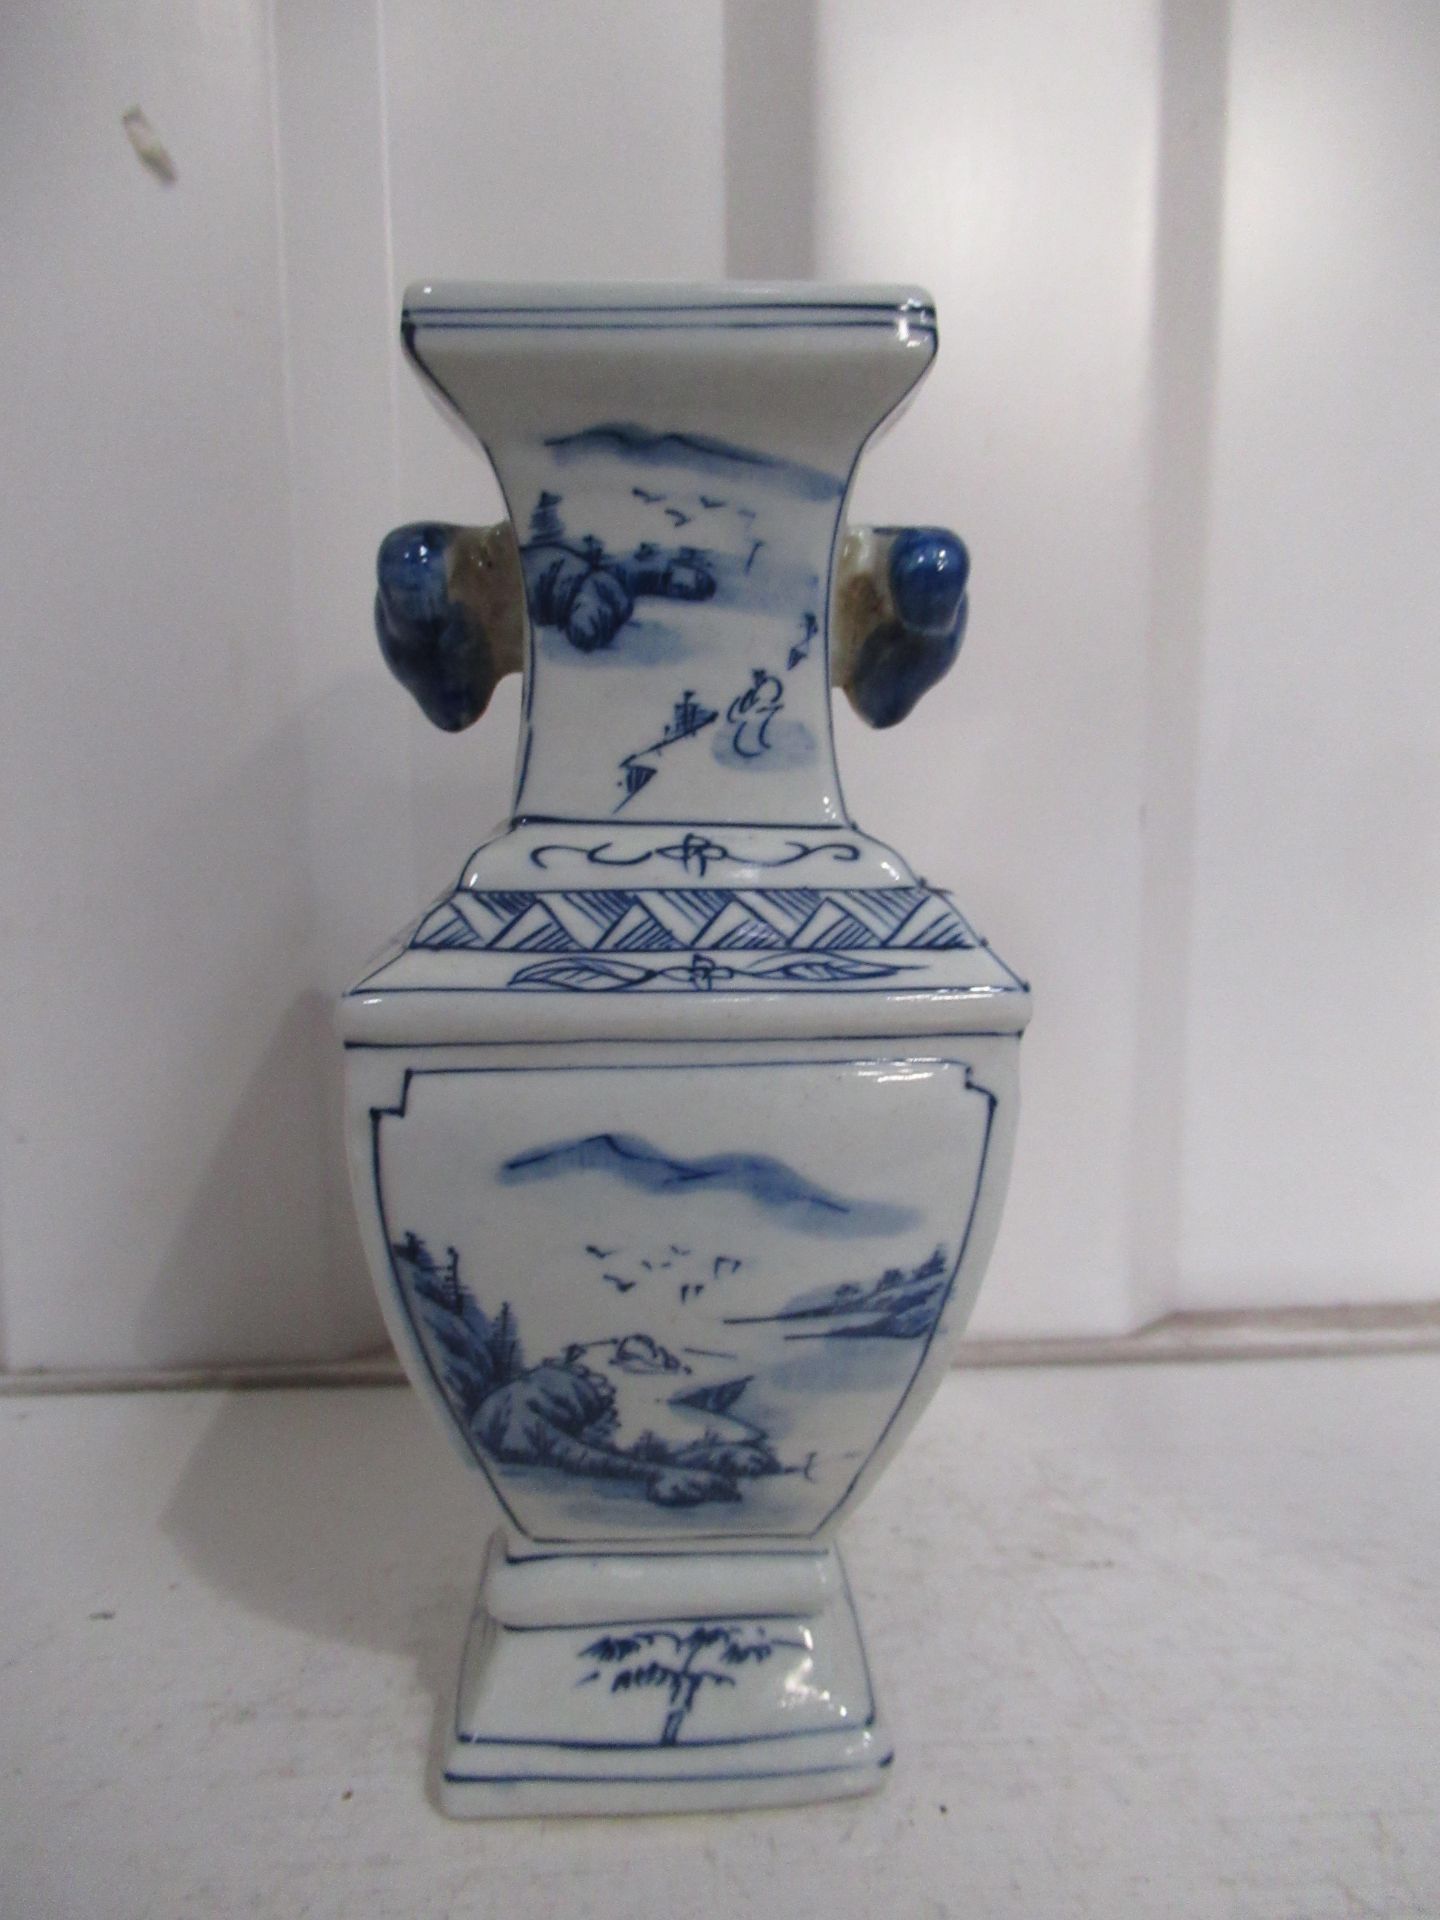 Blue & White Vase with Painted Chinese Scene, Six Character 'Tongzhi' mark to base but may be 'Late